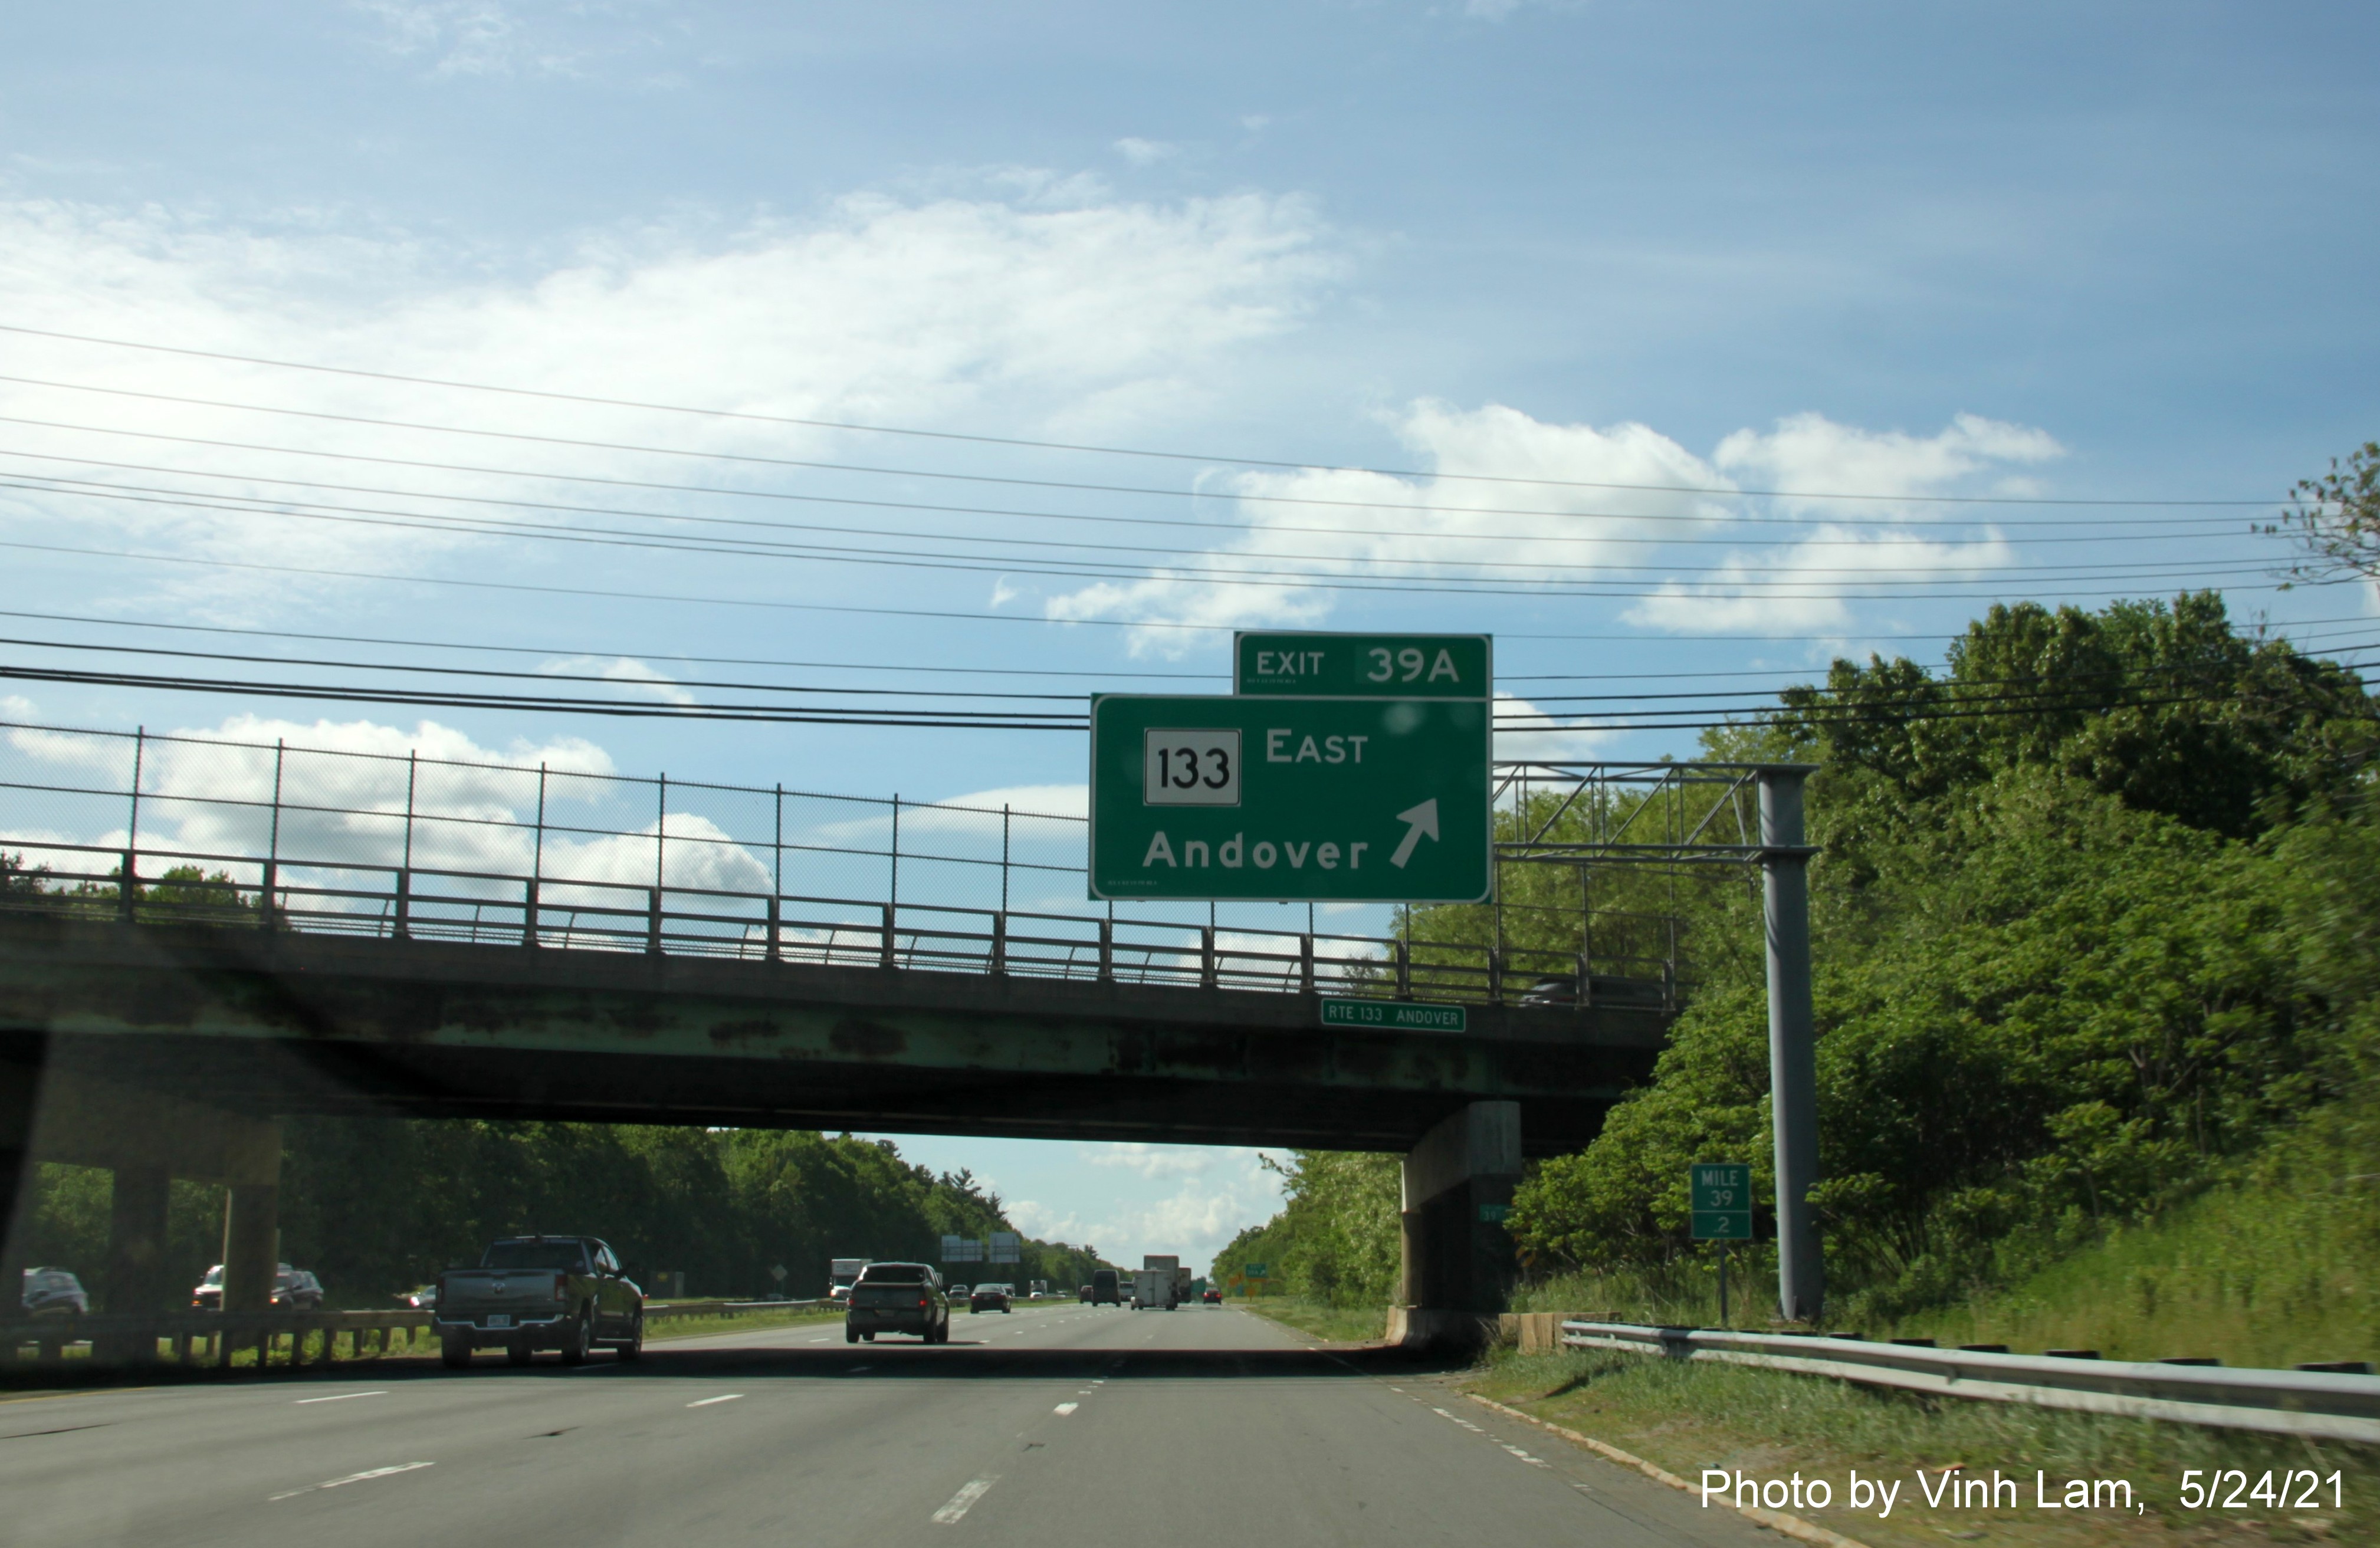 Image of overhead ramp sign for MA 133 East exit with new milepost based exit number on I-93 South in Andover, by Vinh Lam, May 2021